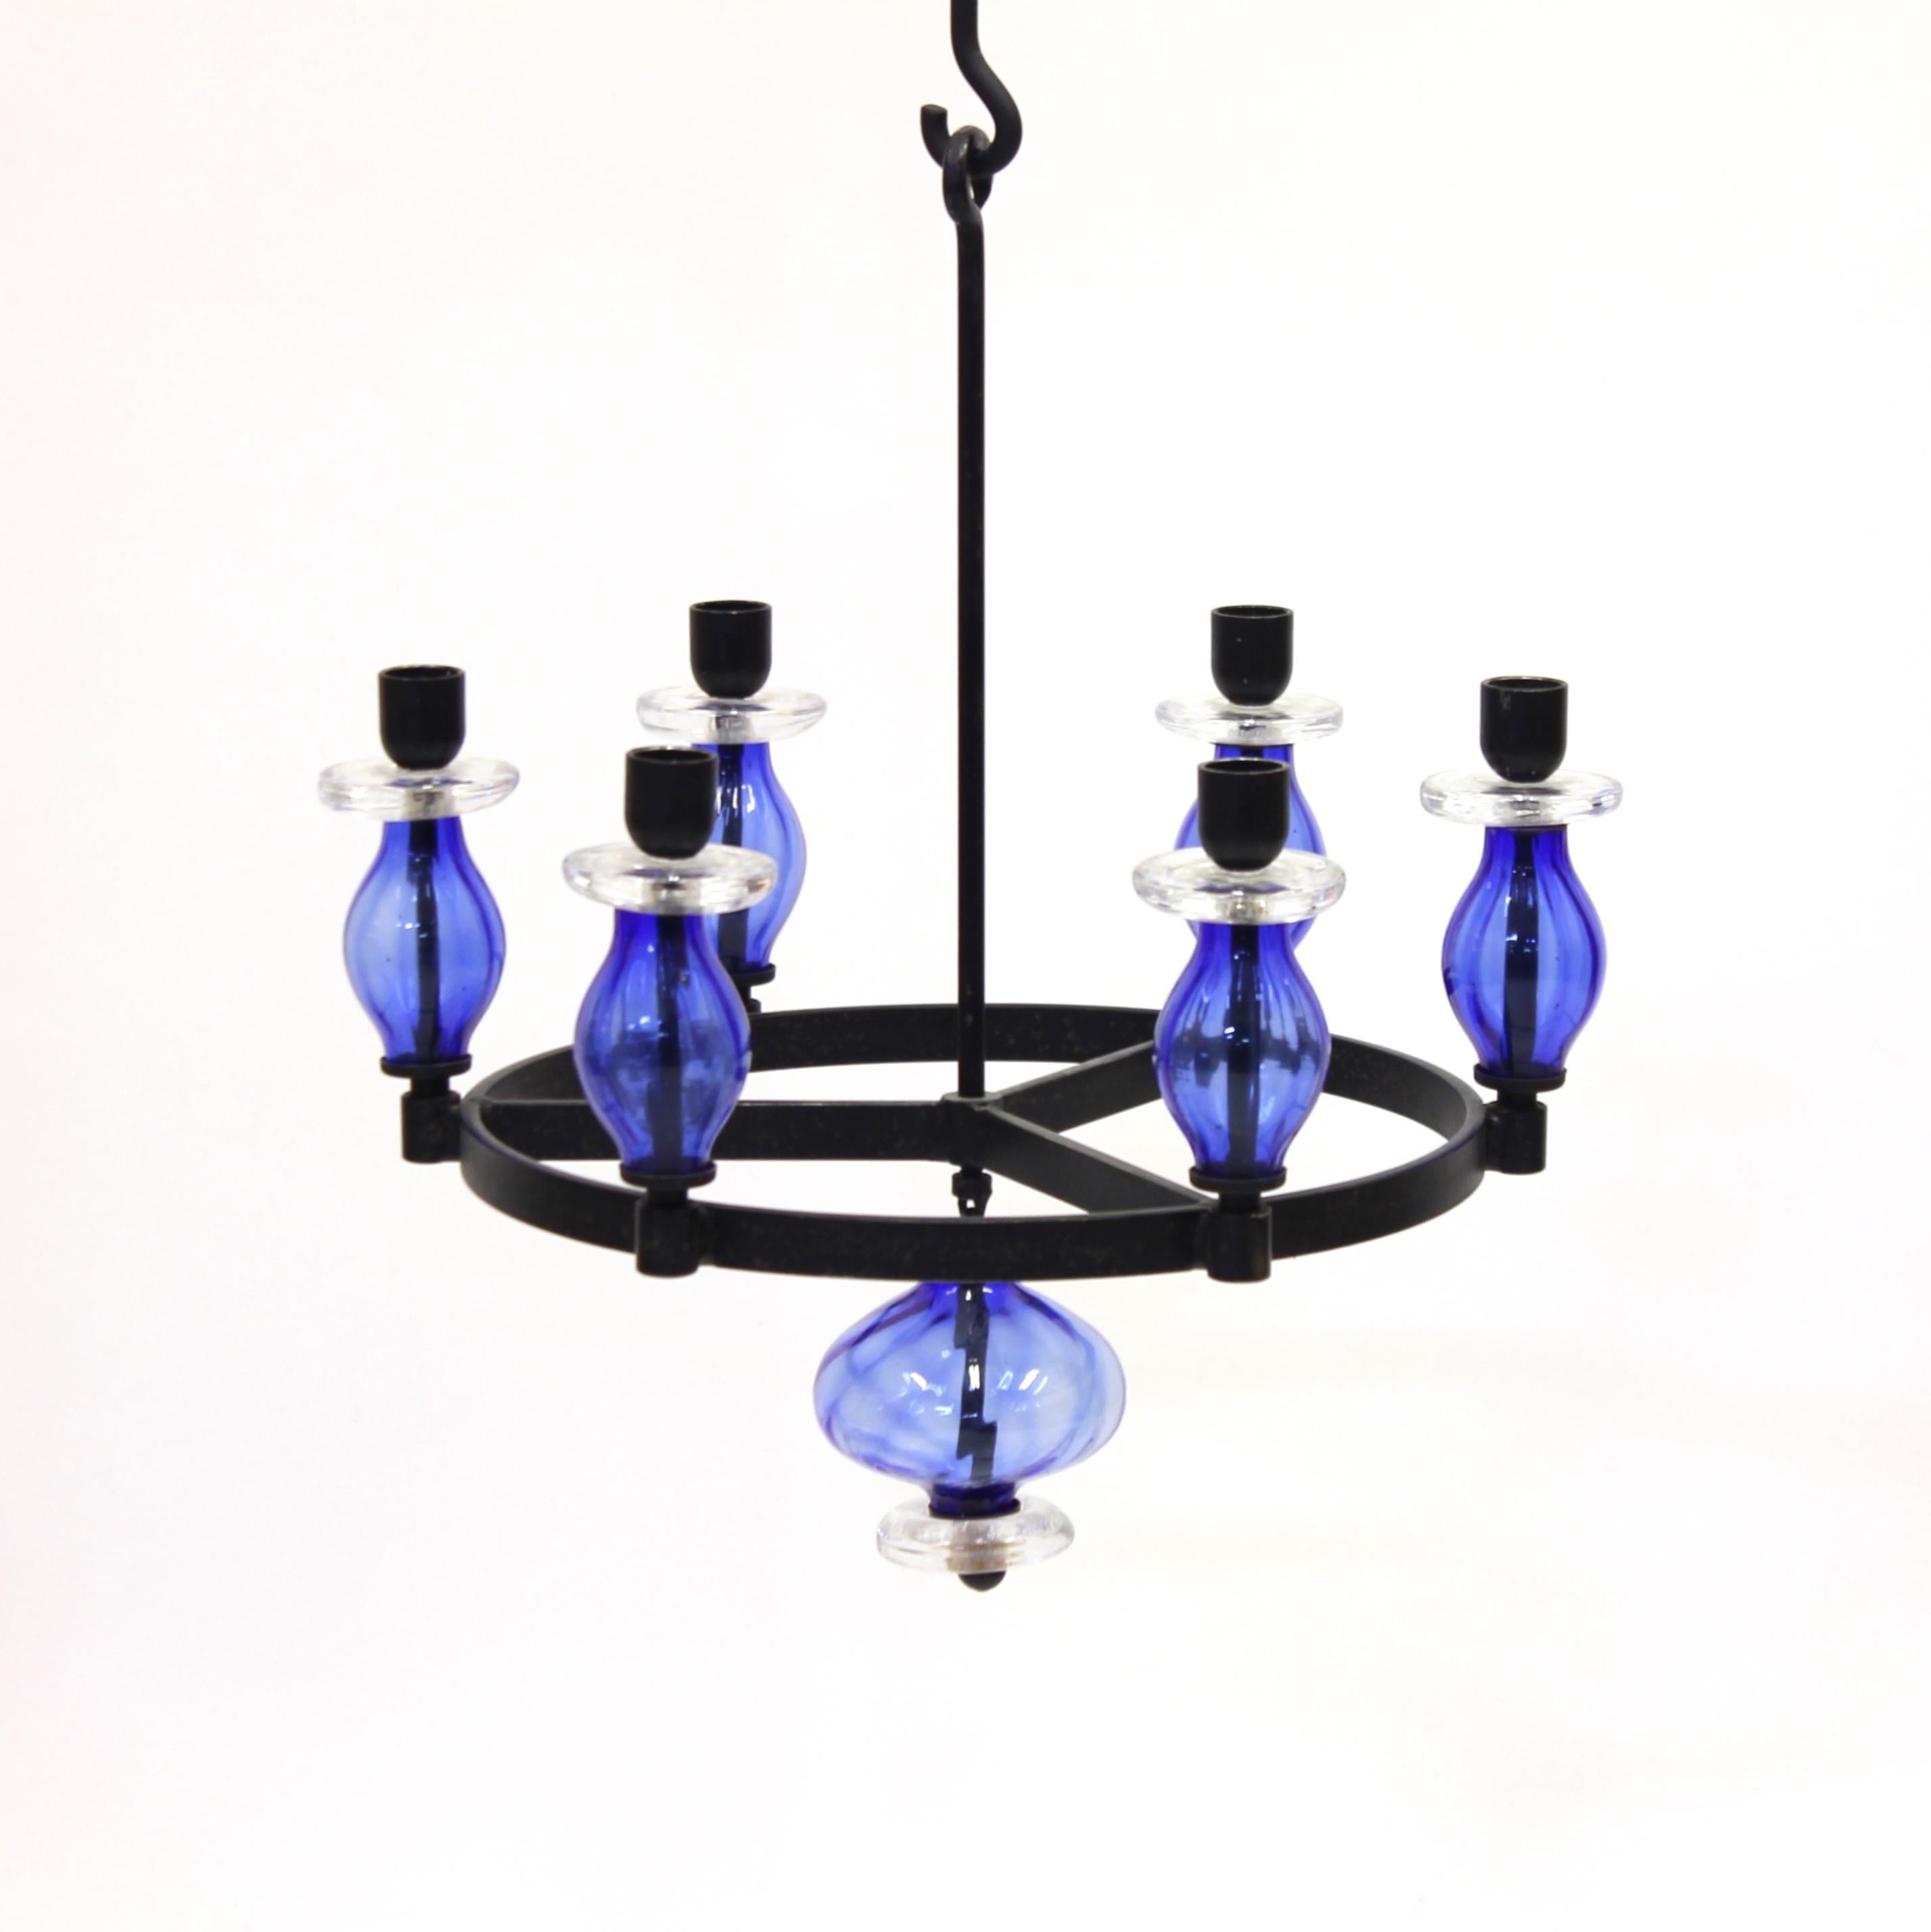 Erik Höglund, Rare Glass and Wrought Iron Chandelier, Boda Smide, 1960s For Sale 2